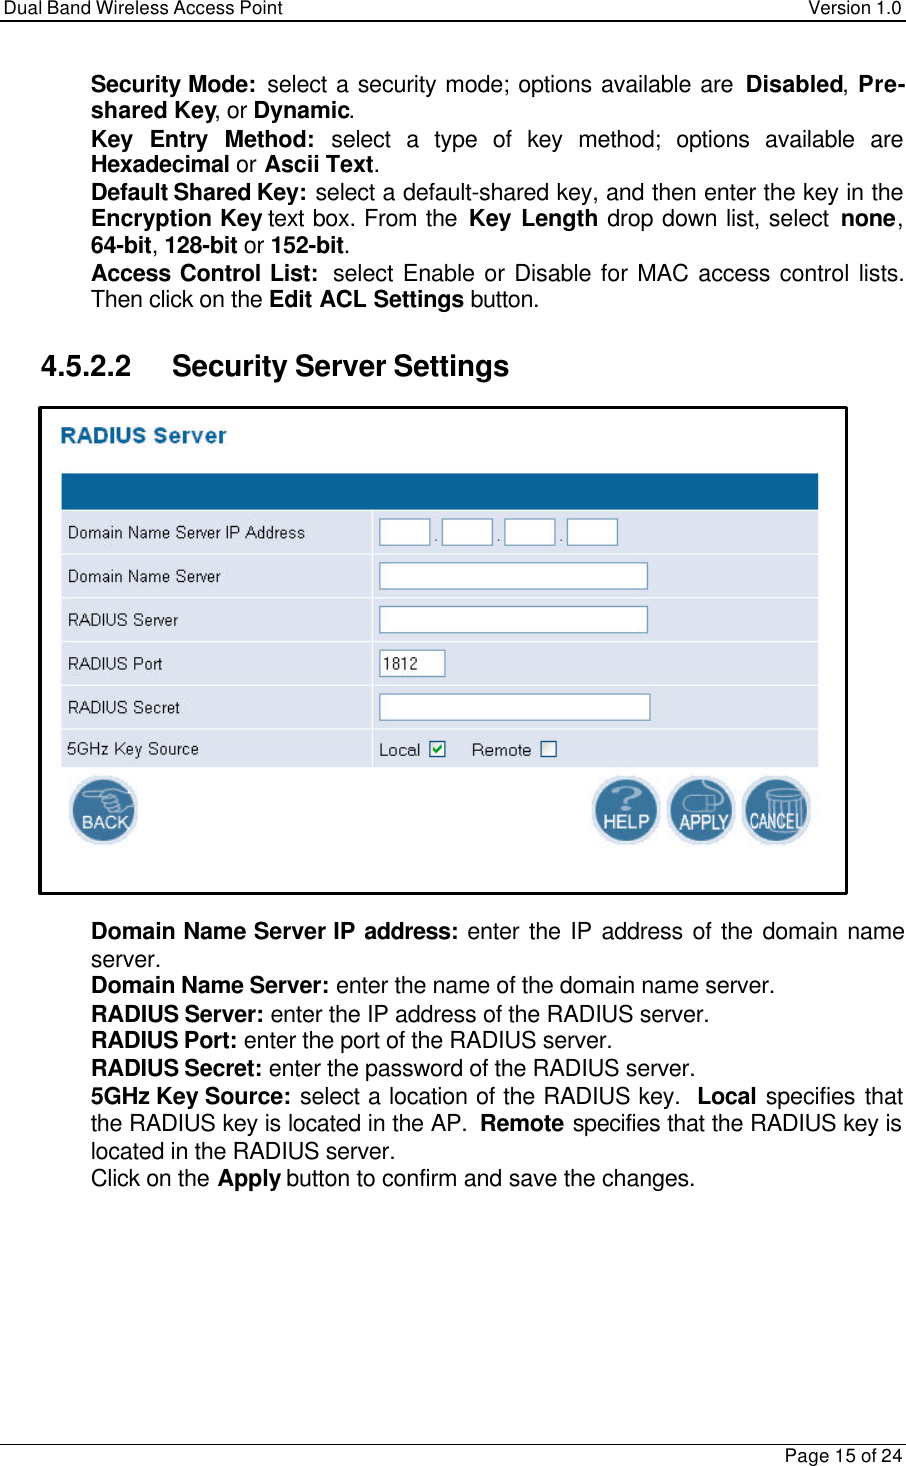 Dual Band Wireless Access Point Version 1.0Page 15 of 24 Security Mode:  select a security mode; options available are Disabled, Pre-shared Key, or Dynamic. Key Entry Method: select a type of key method; options available areHexadecimal or Ascii Text. Default Shared Key: select a default-shared key, and then enter the key in theEncryption Key text box. From the Key Length drop down list, select none,64-bit, 128-bit or 152-bit. Access Control List:  select Enable or Disable for MAC access control lists.Then click on the Edit ACL Settings button.4.5.2.2 Security Server Settings Domain Name Server IP address:  enter the IP address of the domain nameserver. Domain Name Server: enter the name of the domain name server. RADIUS Server: enter the IP address of the RADIUS server. RADIUS Port: enter the port of the RADIUS server. RADIUS Secret: enter the password of the RADIUS server. 5GHz Key Source: select a location of the RADIUS key.  Local specifies thatthe RADIUS key is located in the AP.  Remote specifies that the RADIUS key islocated in the RADIUS server. Click on the Apply button to confirm and save the changes.